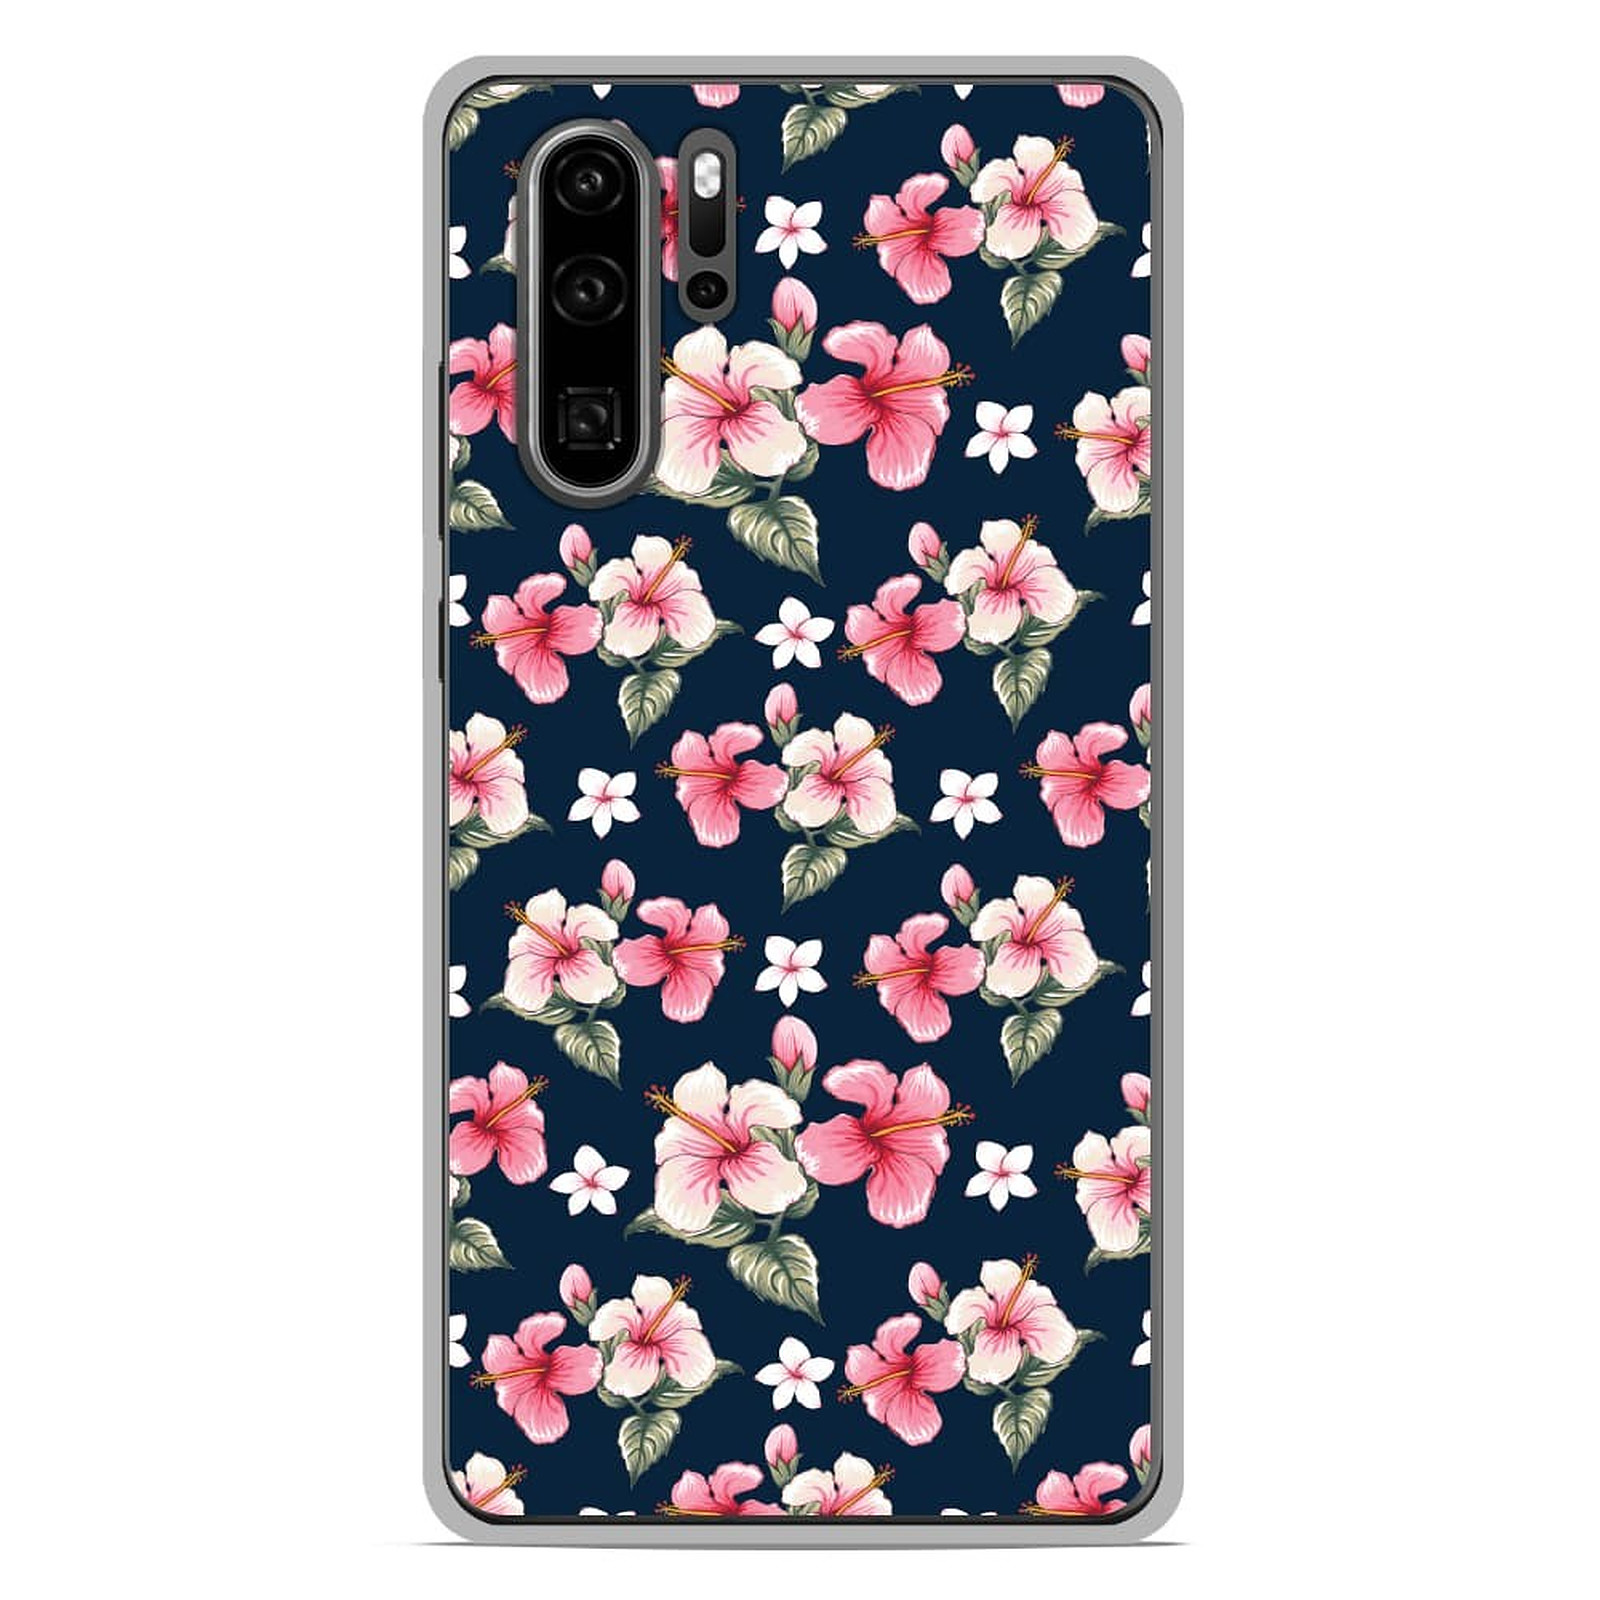 1001 Coques Coque silicone gel Huawei P30 Pro motif Hibiscus Vintage - Coque telephone 1001Coques